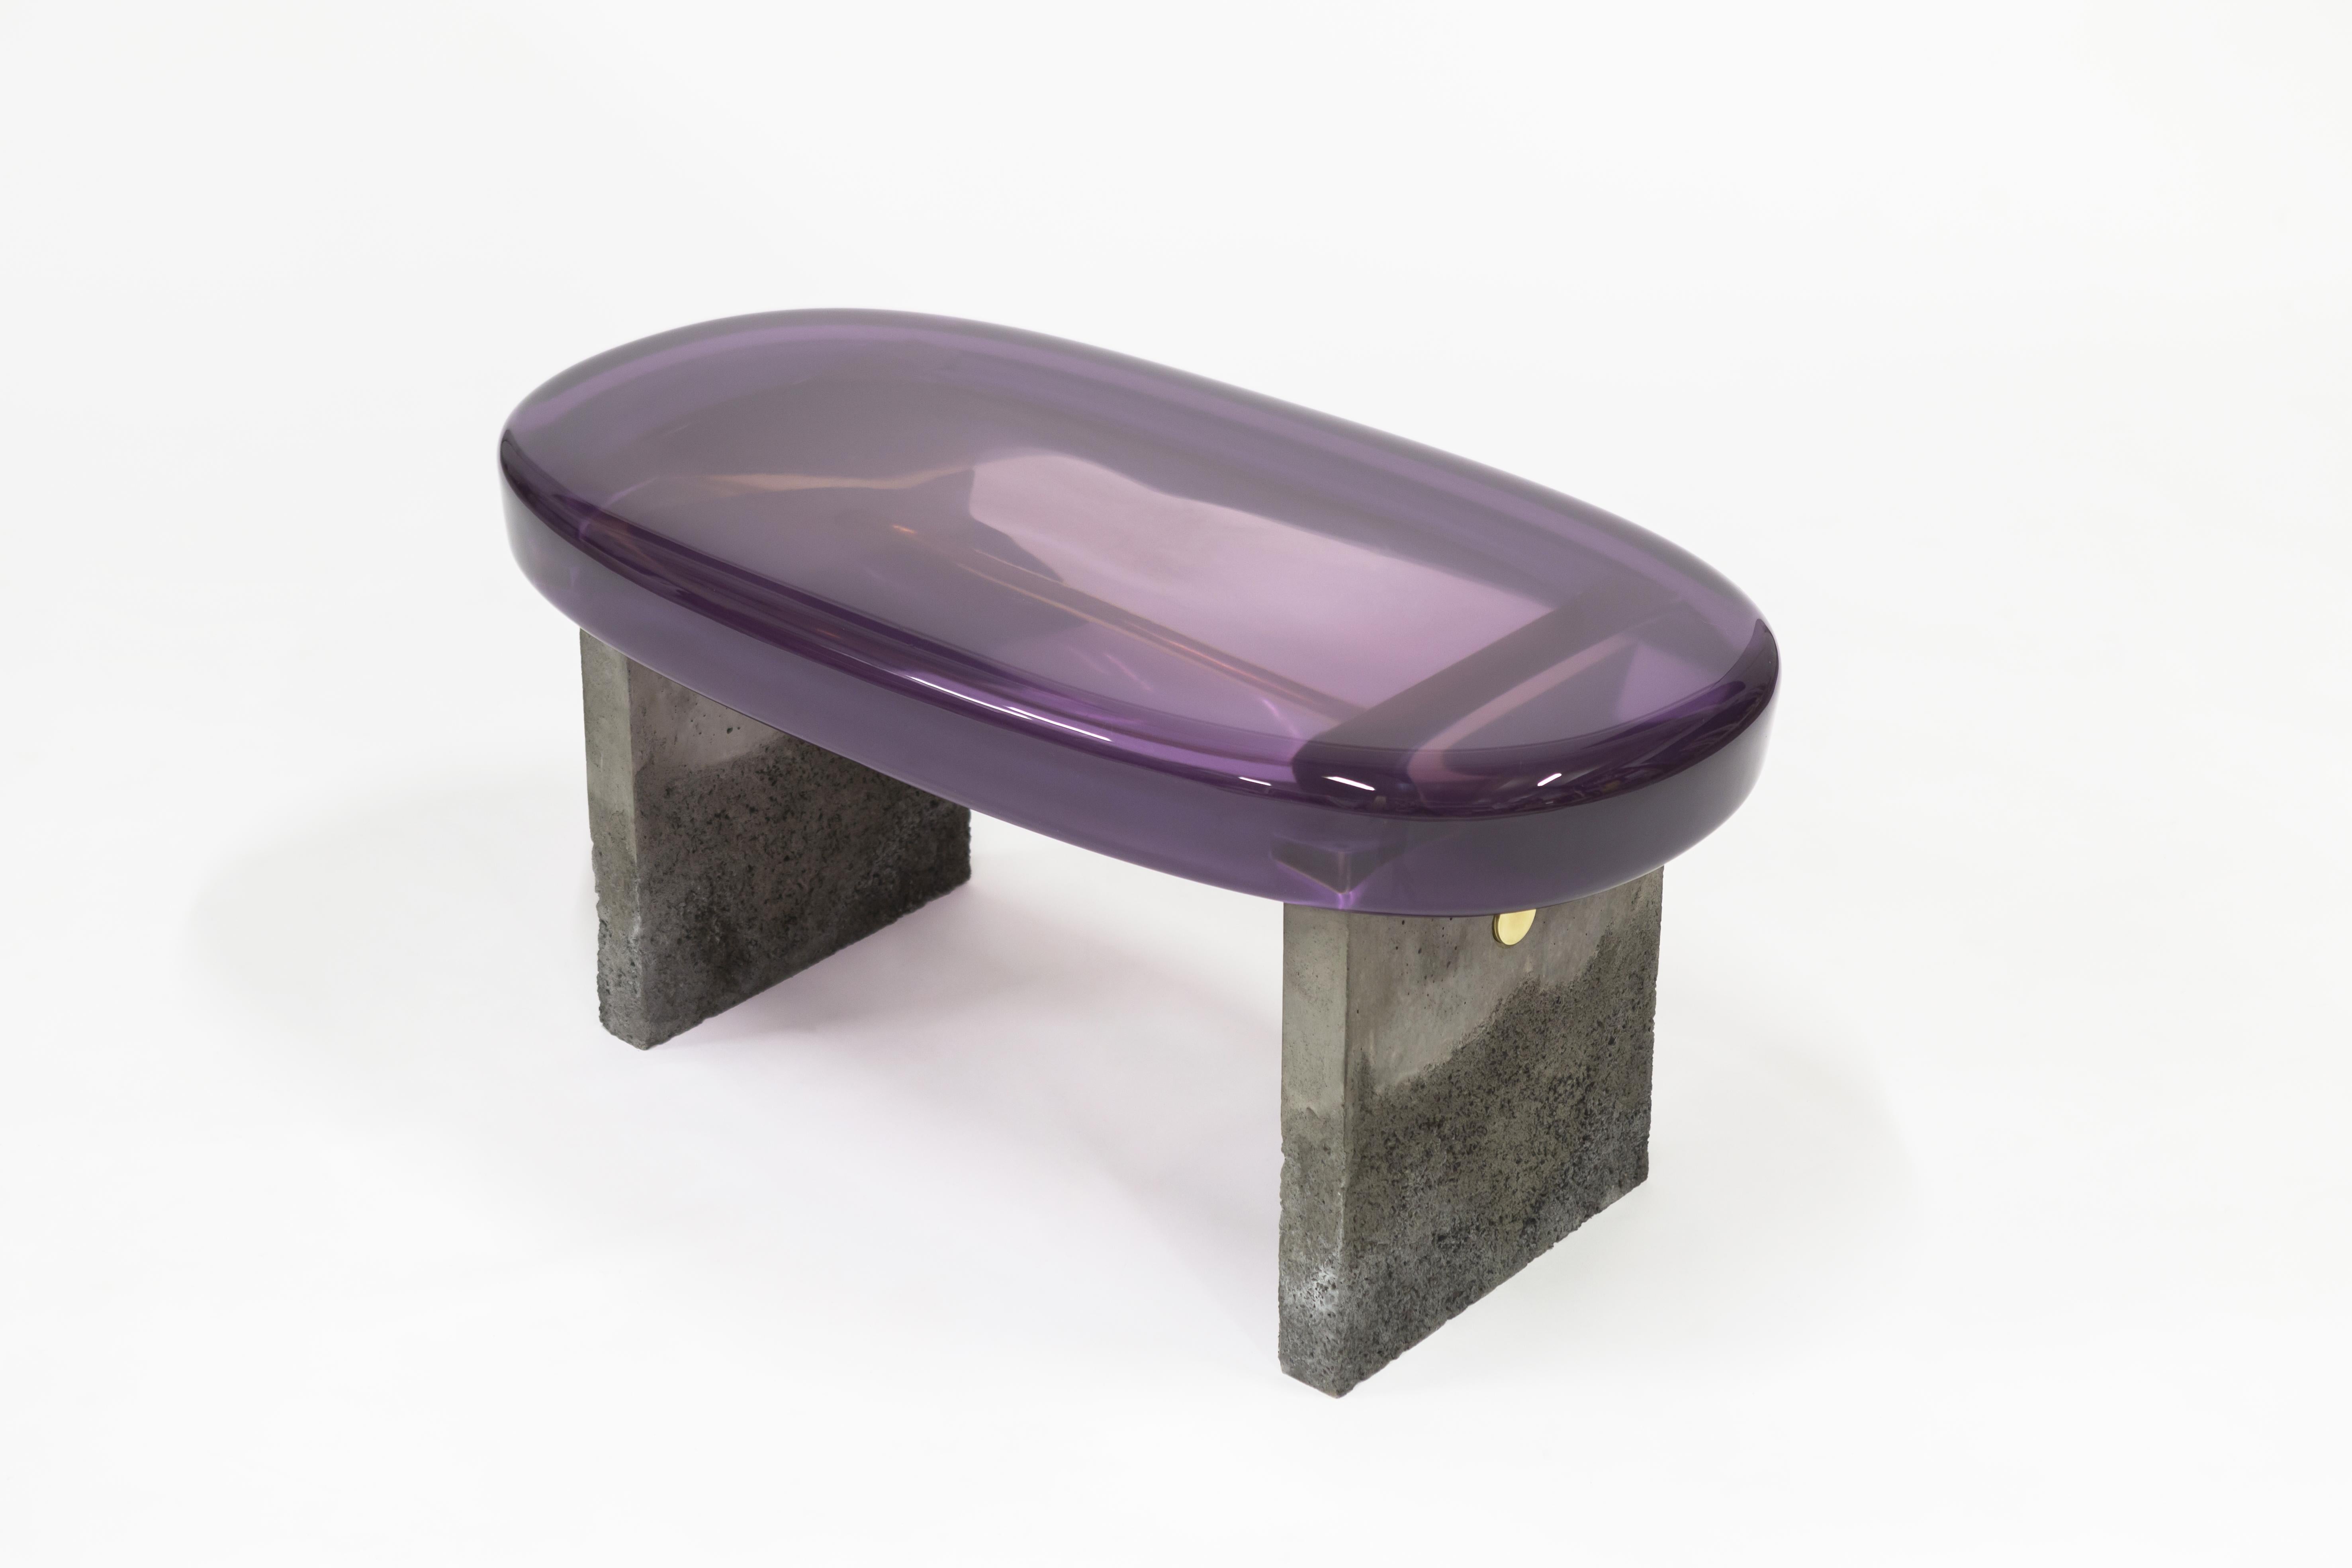 Golia bench by Draga & Aurel.
Dimensions: W 67 x D 33 x H 44 cm.
 Top Ø 50 x 96 cm.
Materials: resin top, concrete.

The Golia benches are featured by sculptural, almost monumental forms, and by an unusual combination of material: The raw,